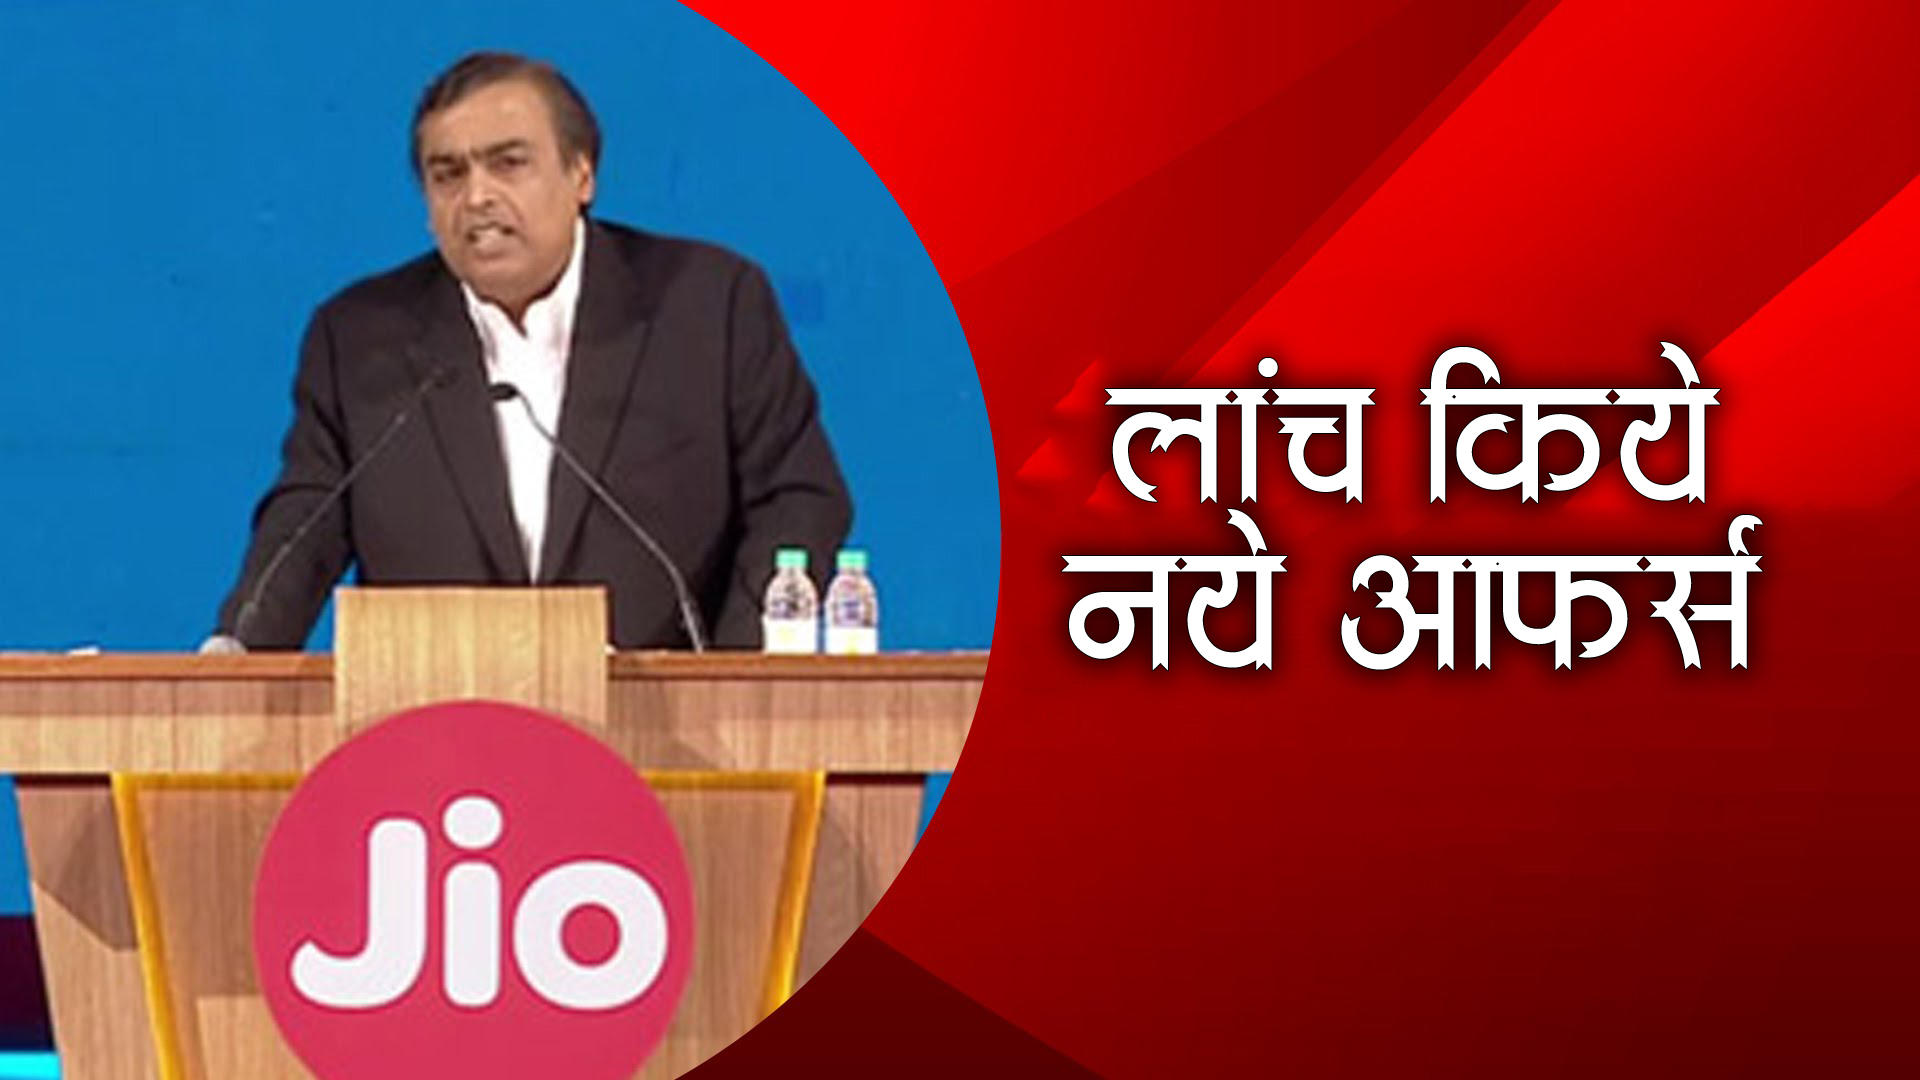 JIO-owner Mukesh Ambani hit out 4 new offers for users (1)